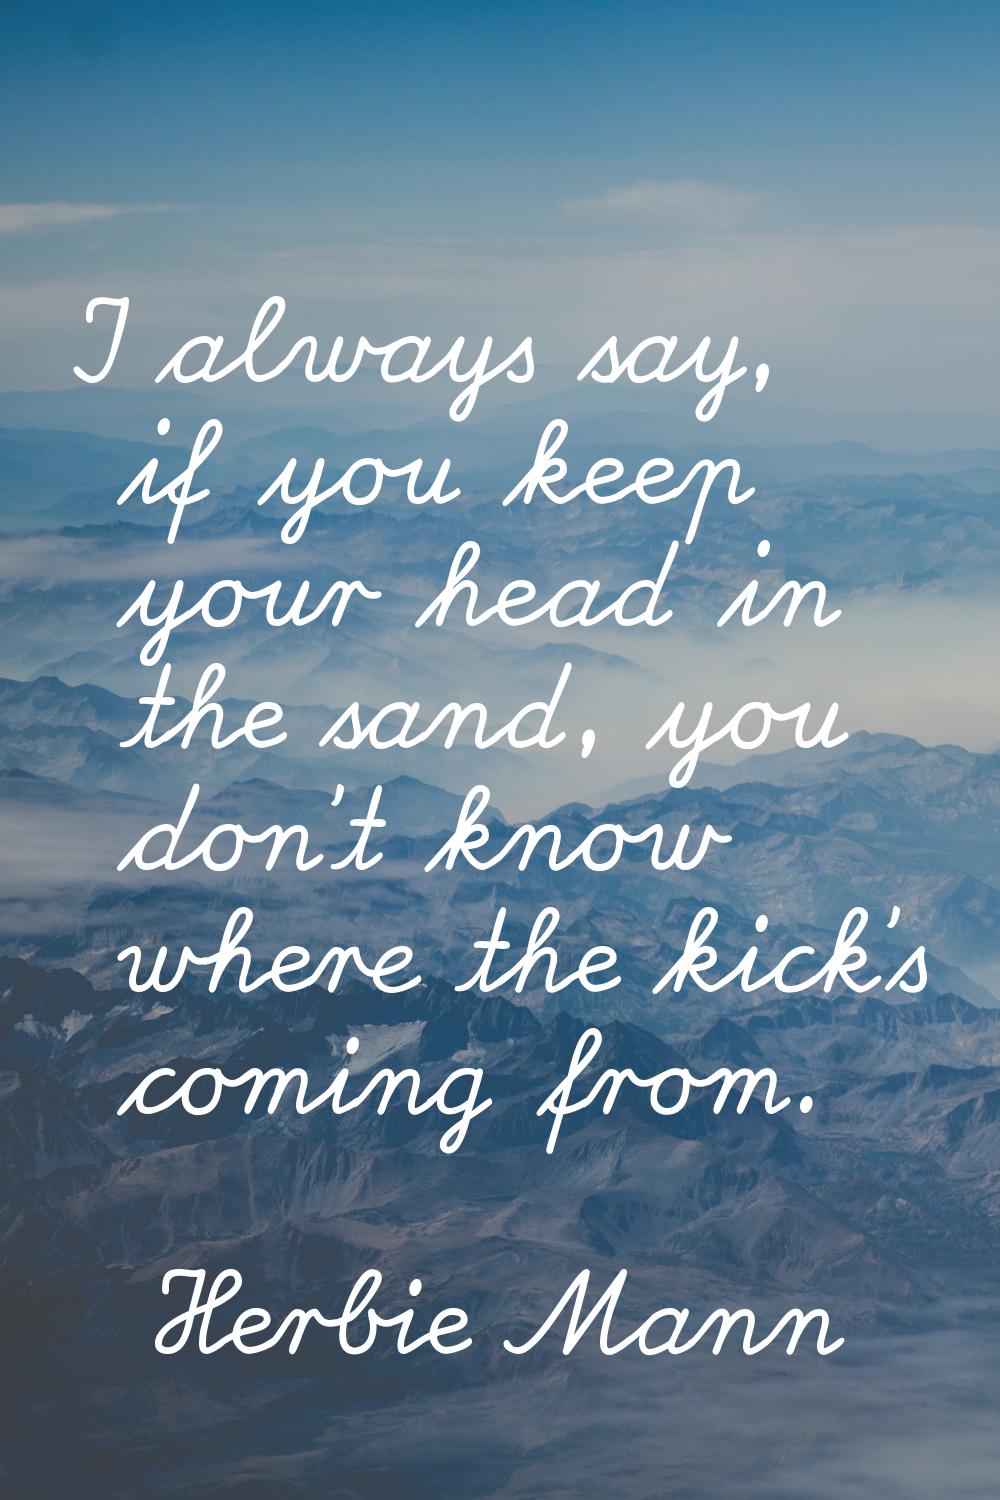 I always say, if you keep your head in the sand, you don't know where the kick's coming from.